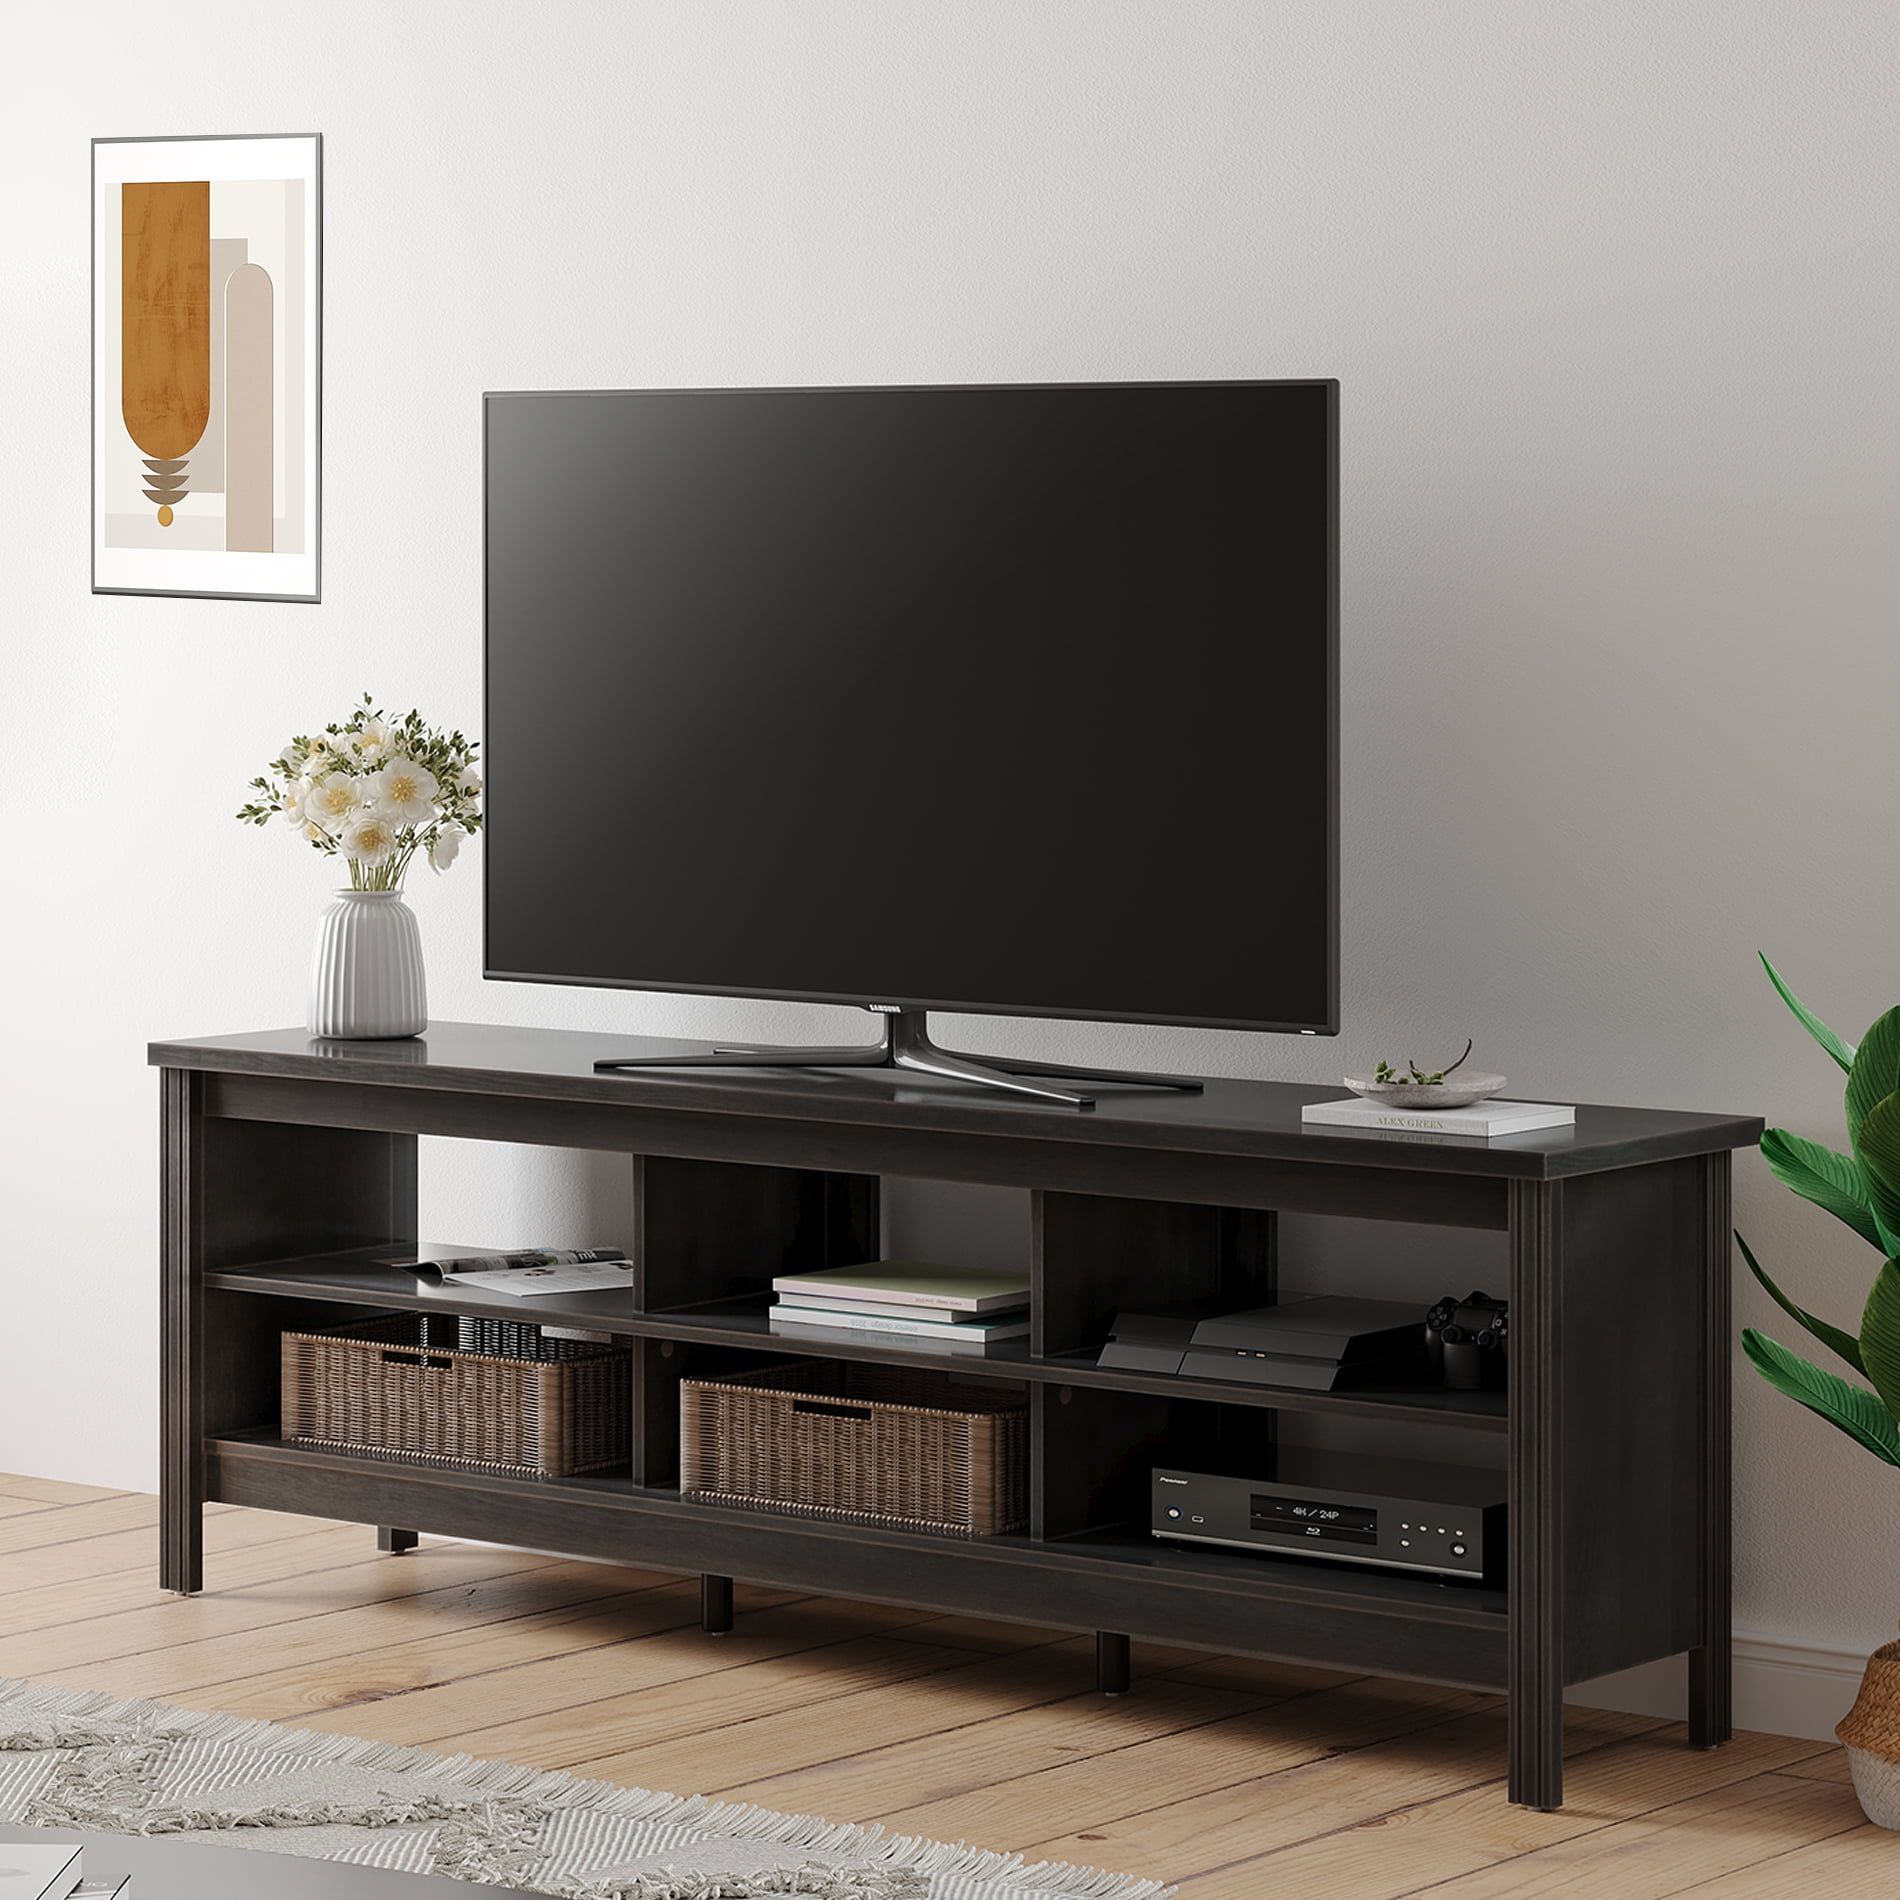 Tv Stand For 75 Inch Tv Wood Media Console With 6 Open Shelves, Black, 70"  – Walmart Throughout Media Entertainment Center Tv Stands (View 6 of 15)